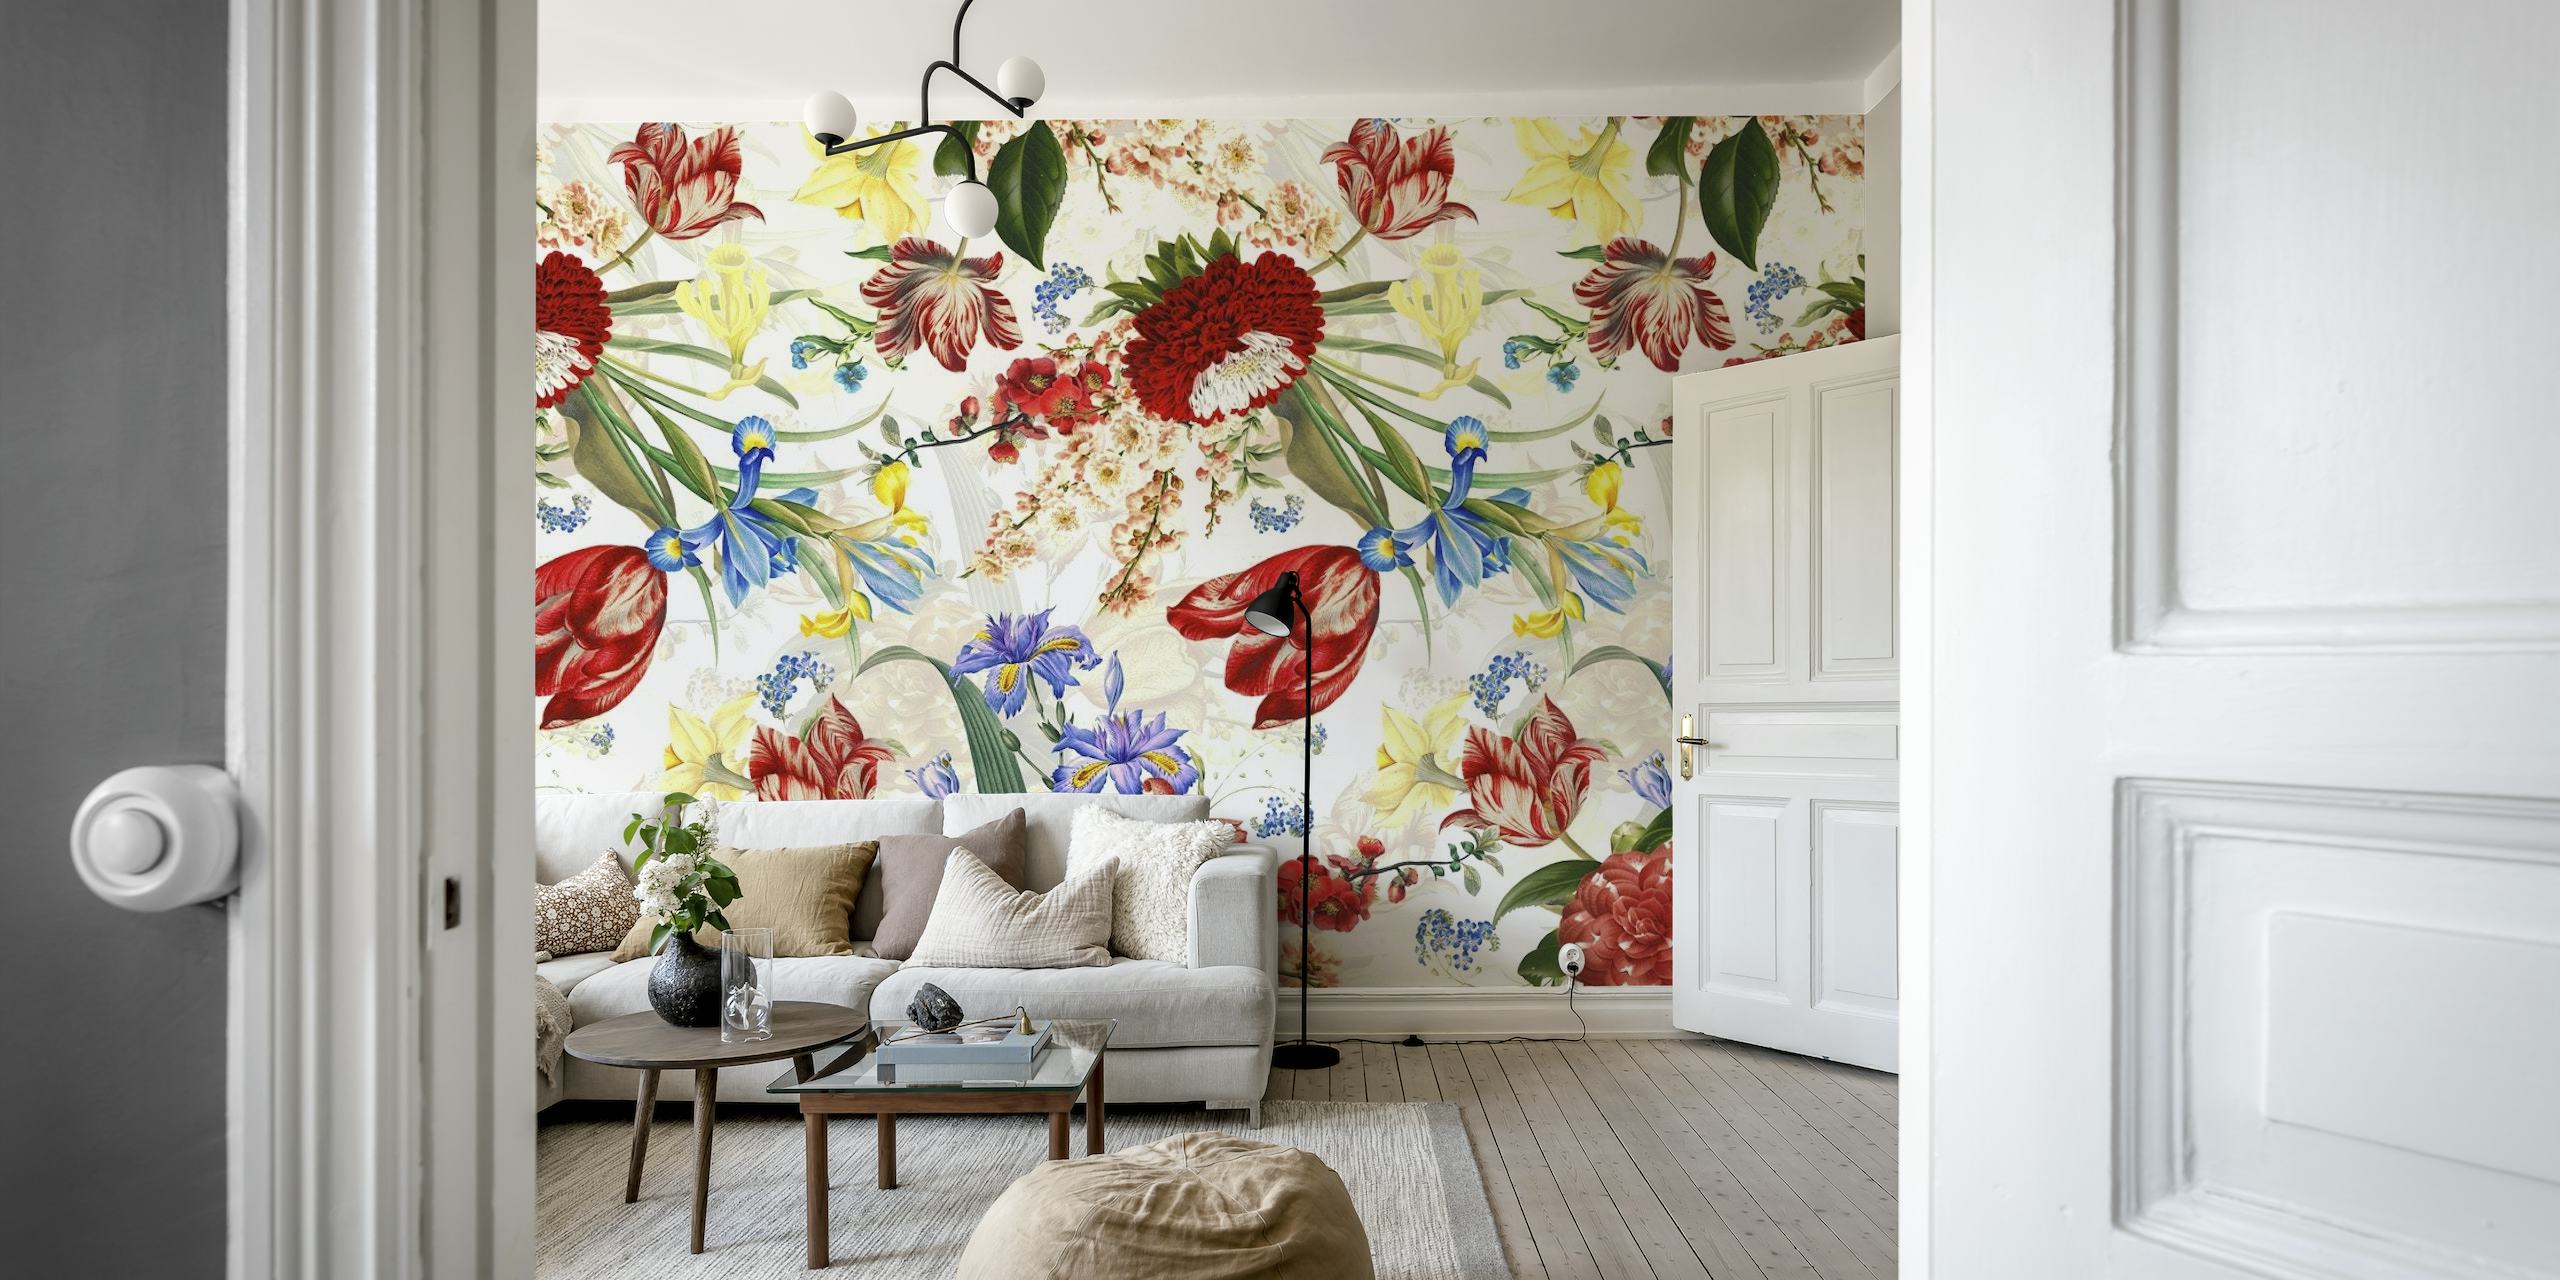 Lush Antique Spring Garden wall mural showing a variety of blooming flowers